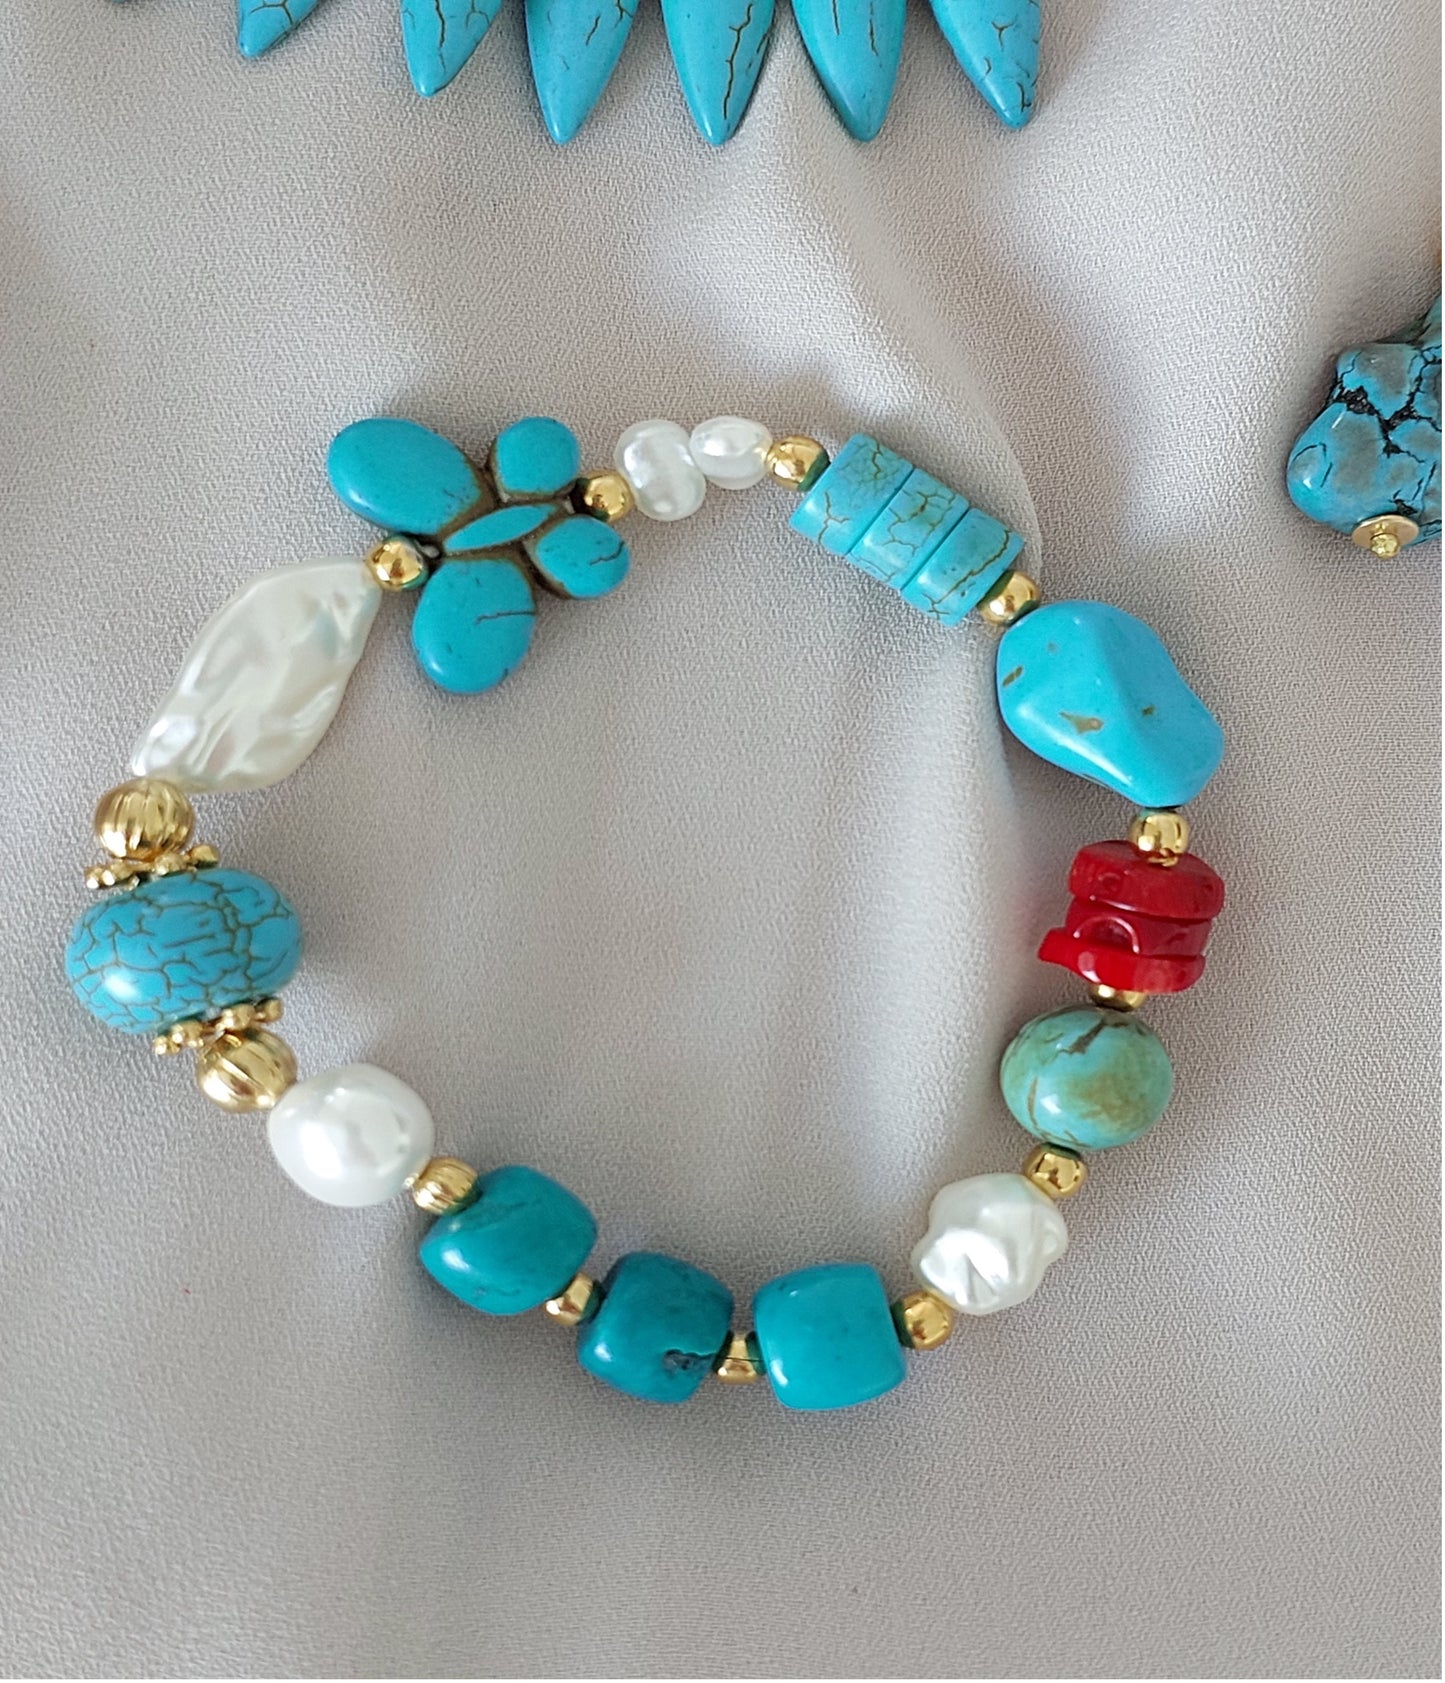 Jewelry Set Necklace Bracelet Ring Earrings Handmade Gemstones Turquoise and Red Beads Multi-size Stones Great for Gifts 4 pieces